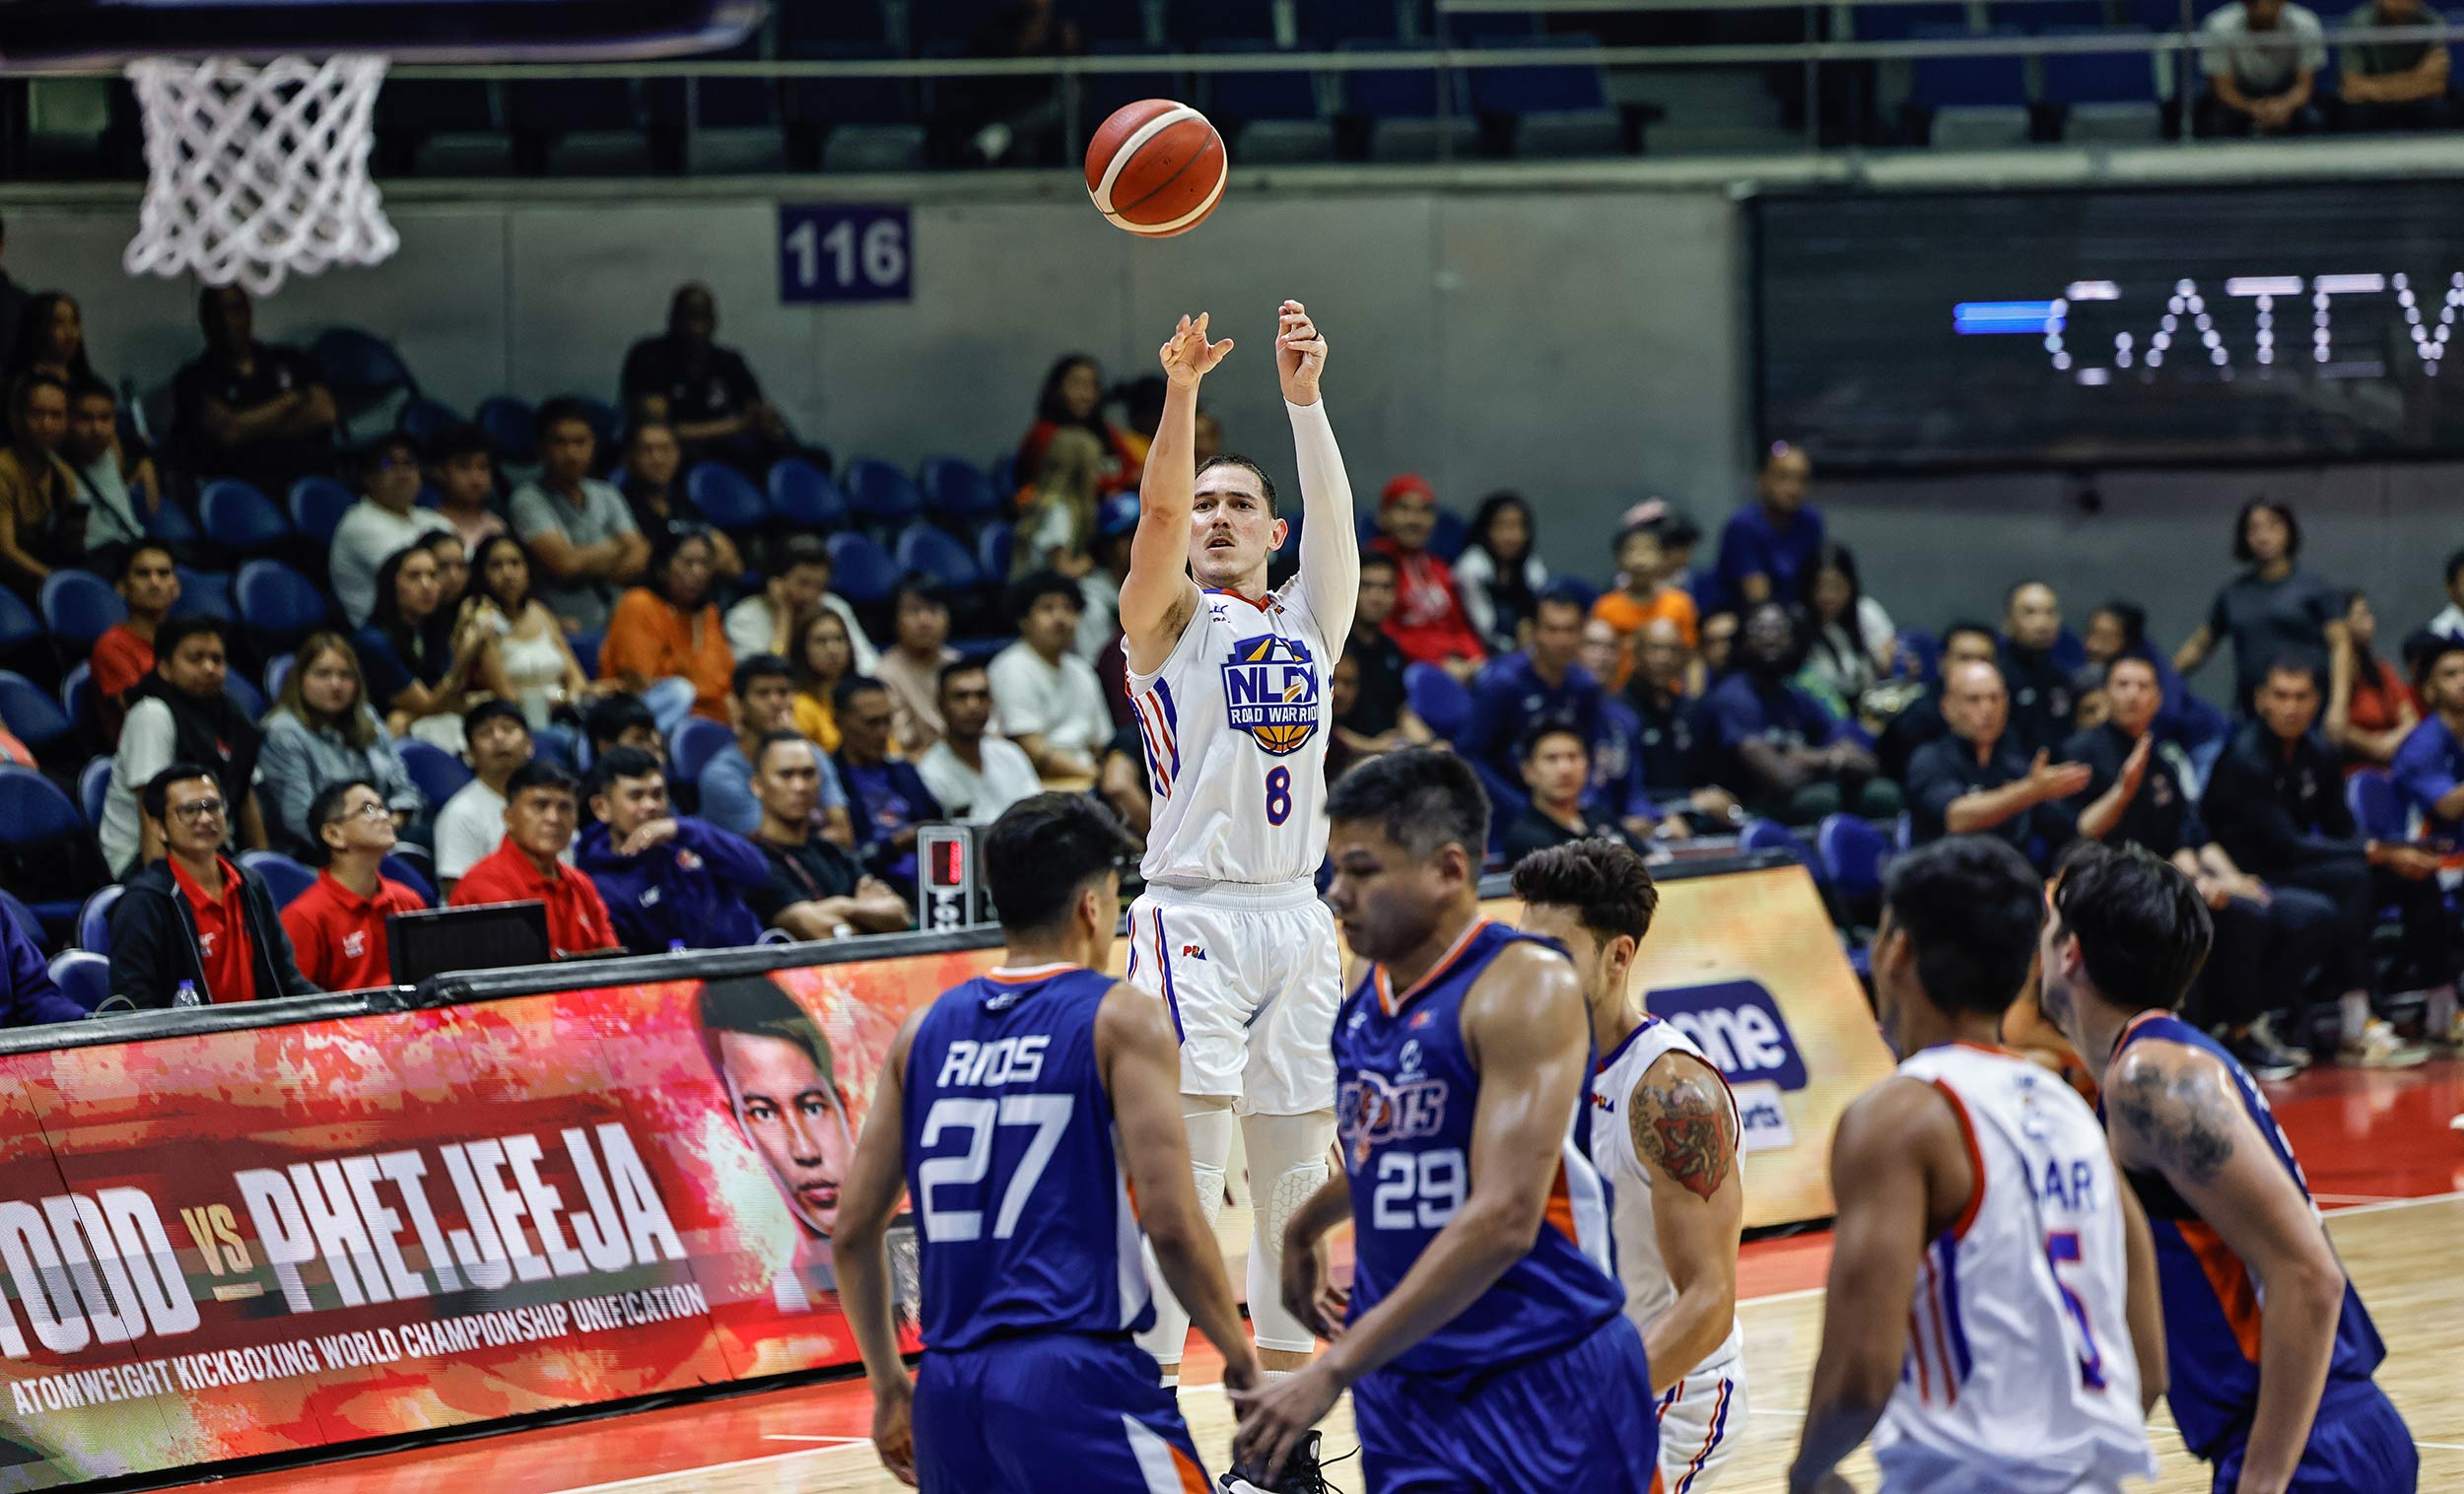 bolts survive bolick’s career night for first blood